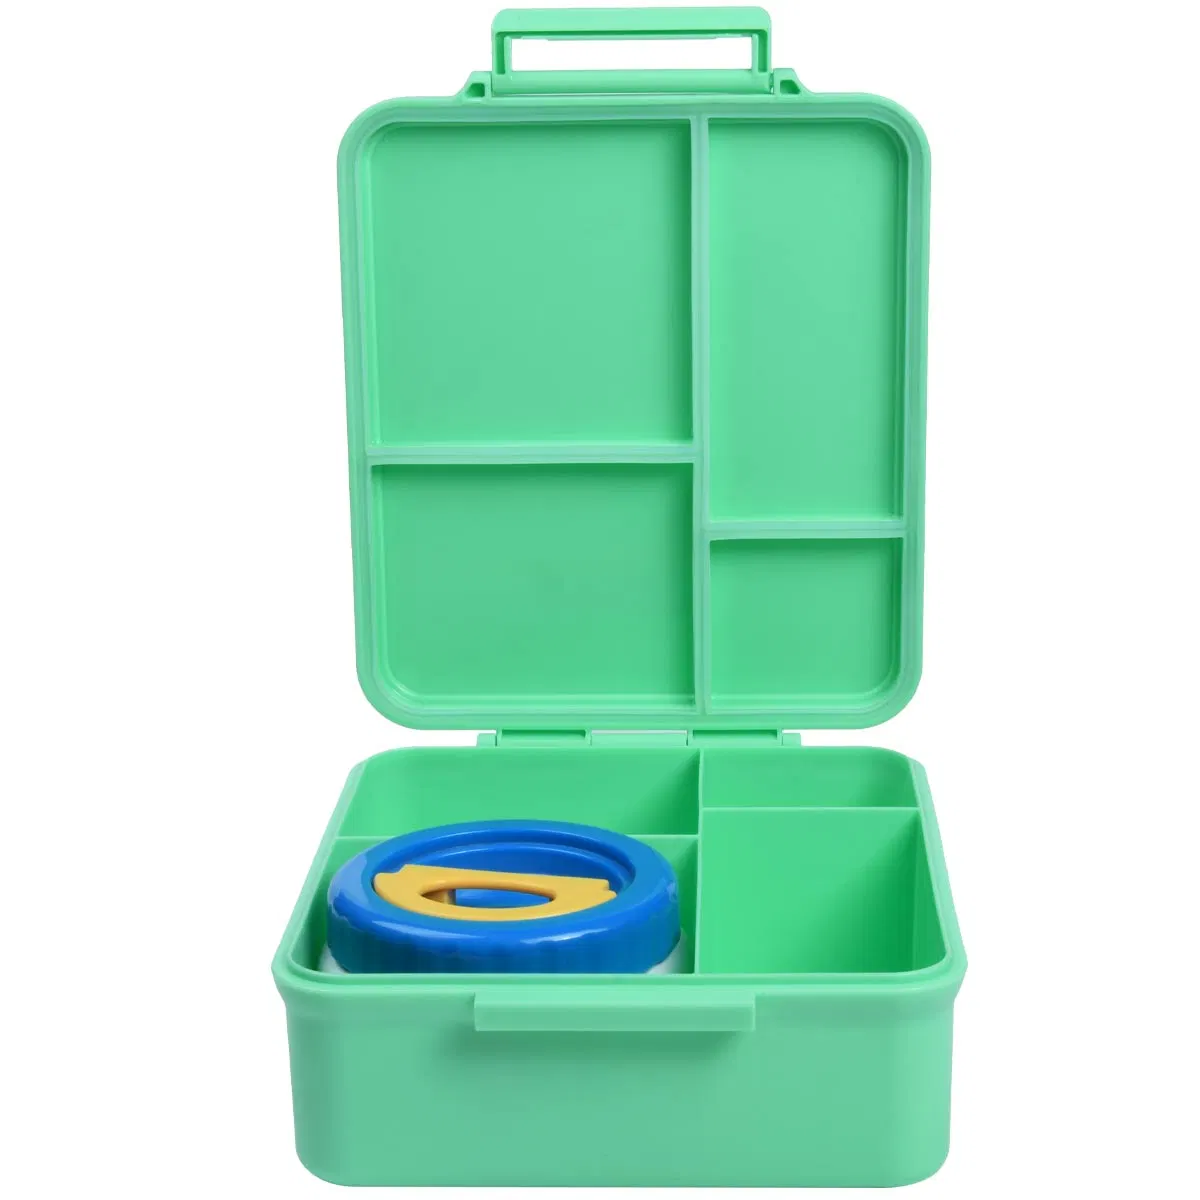 Aohea Plastic Lunchbox Leak-Proof Lunch Bento Box Kit for Adults&Kids